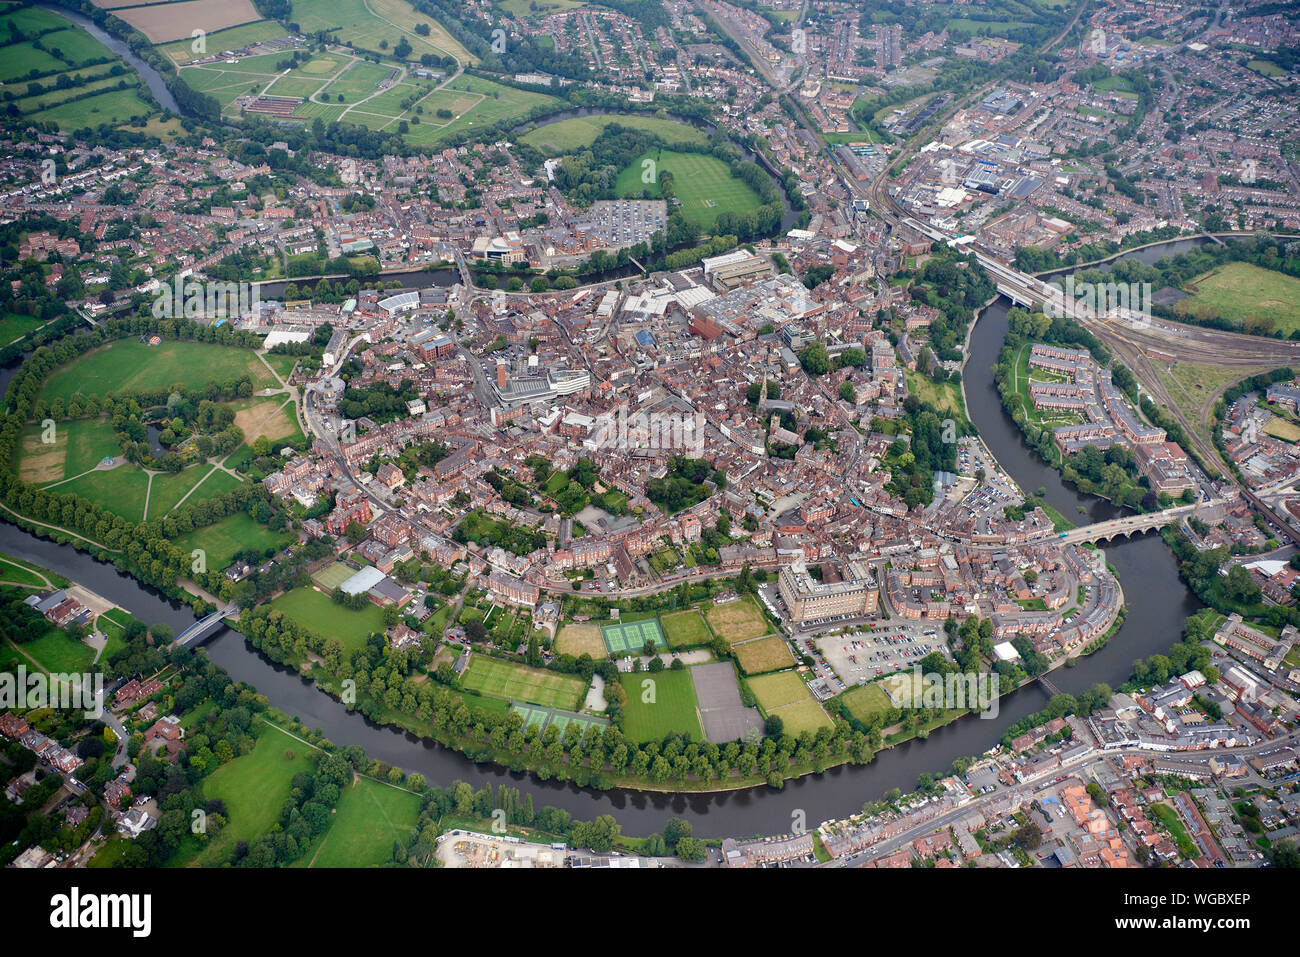 An aerial view of Shrewsbury, Shropshire, showing the river Severn around the city. Western Midlands, England, UK Stock Photo